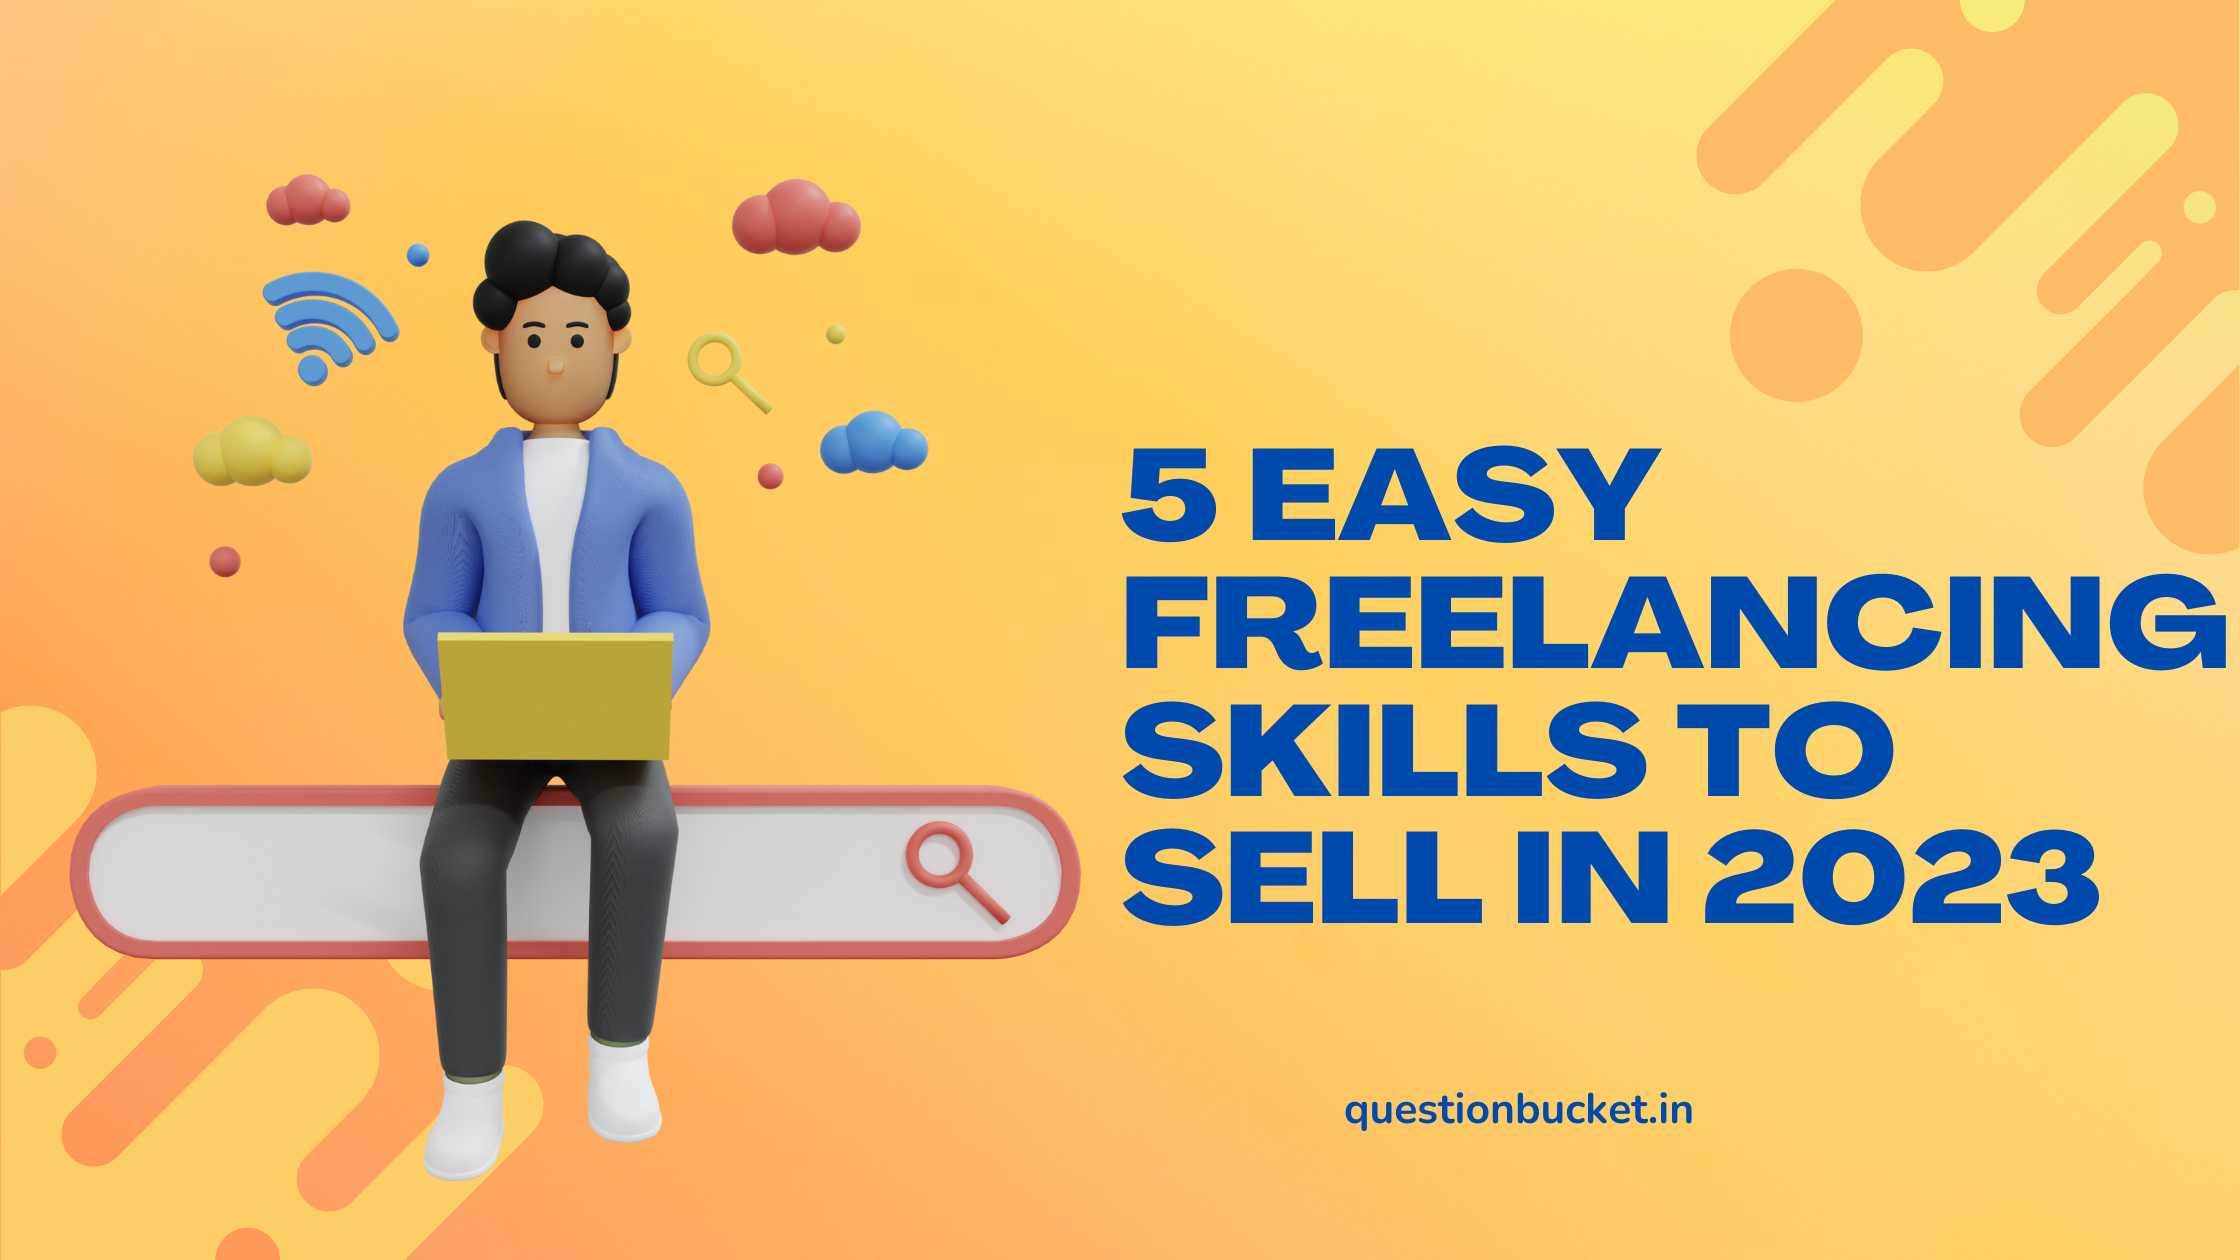 5 Easy Freelancing Skills to Sell in 2023